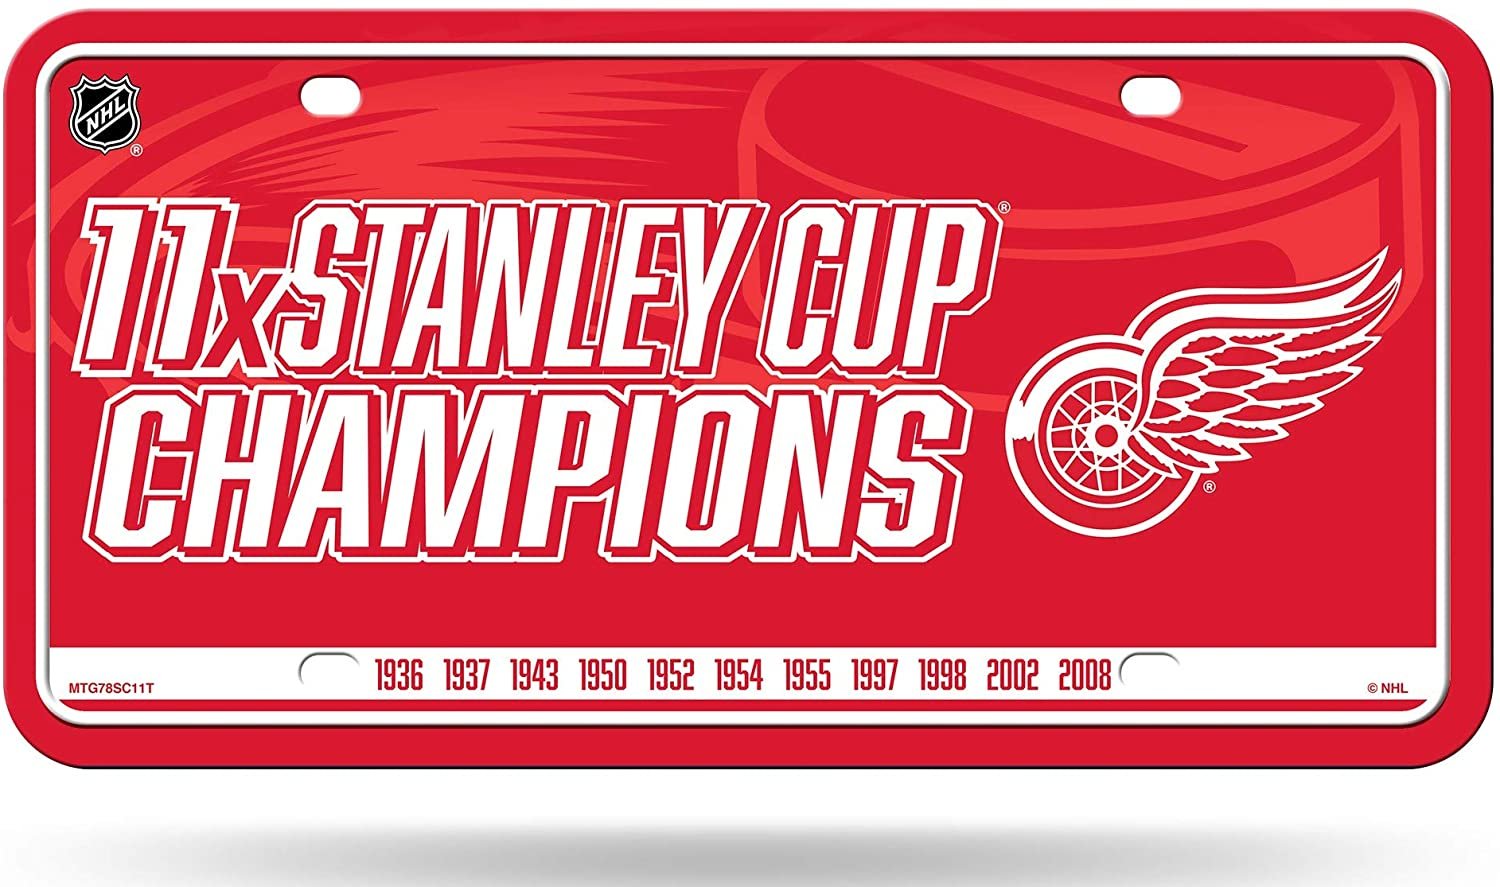 Detroit Red Wings Metal Auto Tag License Plate, 11-Time Stanley Cup Champions, 6x12 Inch